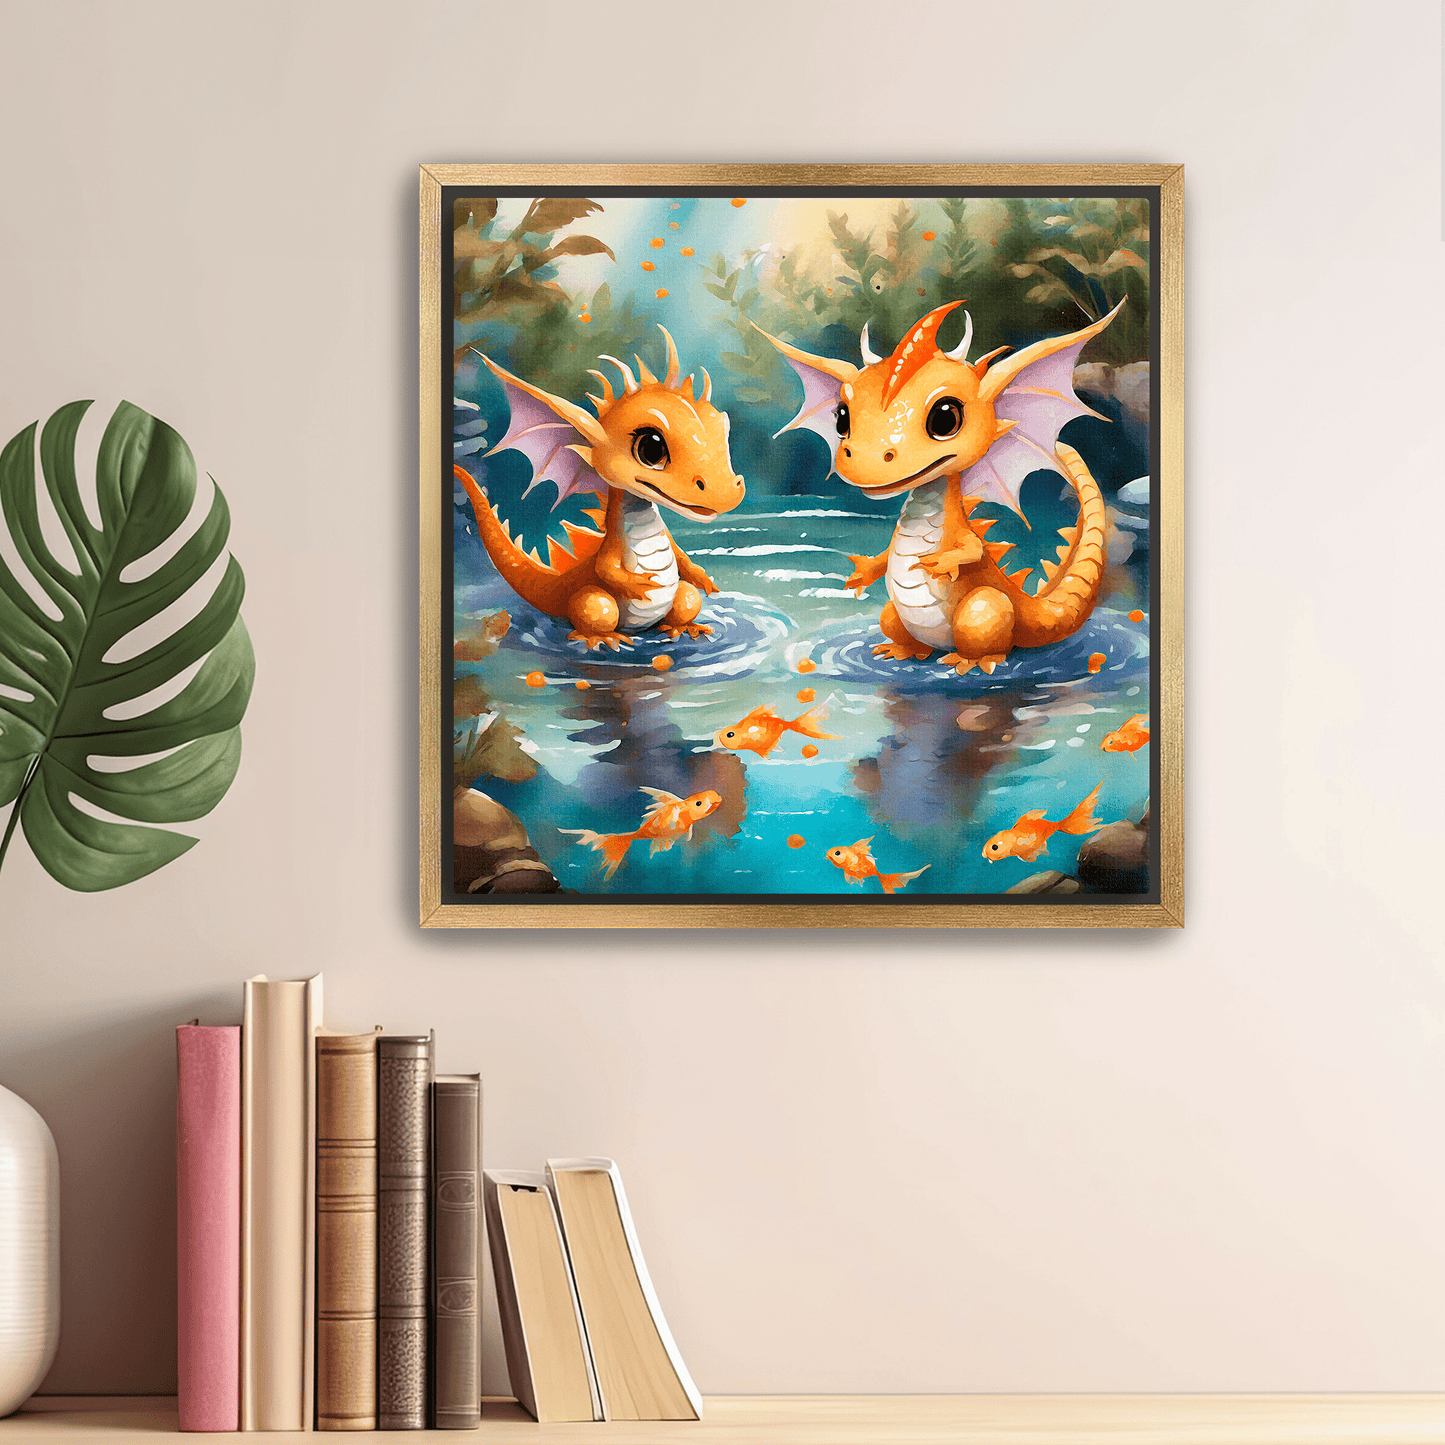 Baby Dragons Play with Goldfish - Canvas Wrap - Premium Canvas Wrap